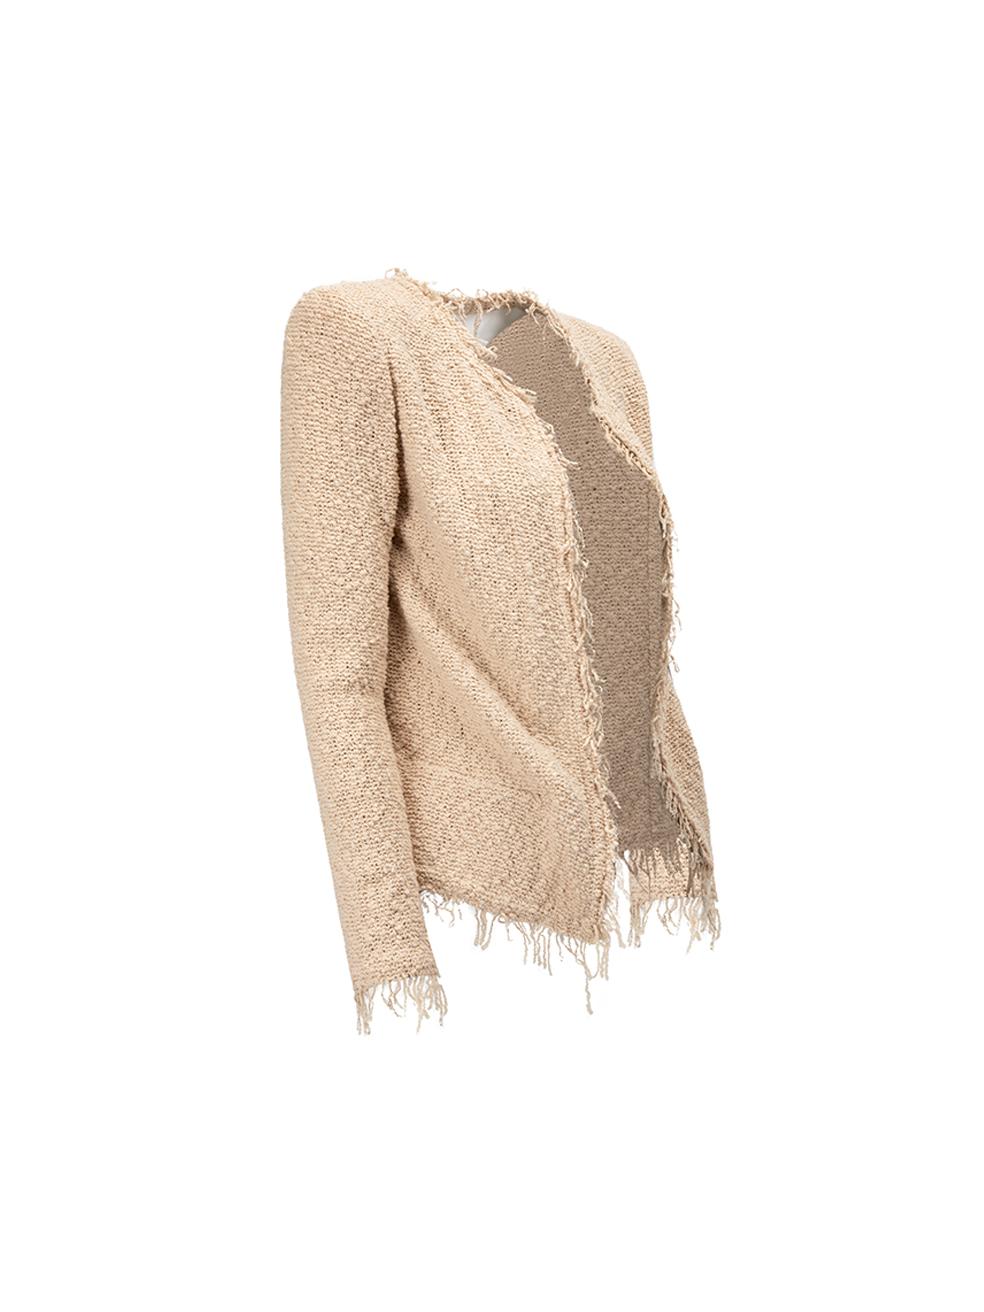 CONDITION is Very good. Hardly any visible wear to jacket is evident on this used IRO designer resale item.



Details


Cream

Cotton

Blazer 

Fringe detailing 

Loose fit 

Long sleeve

Slip on fastening  





Made in